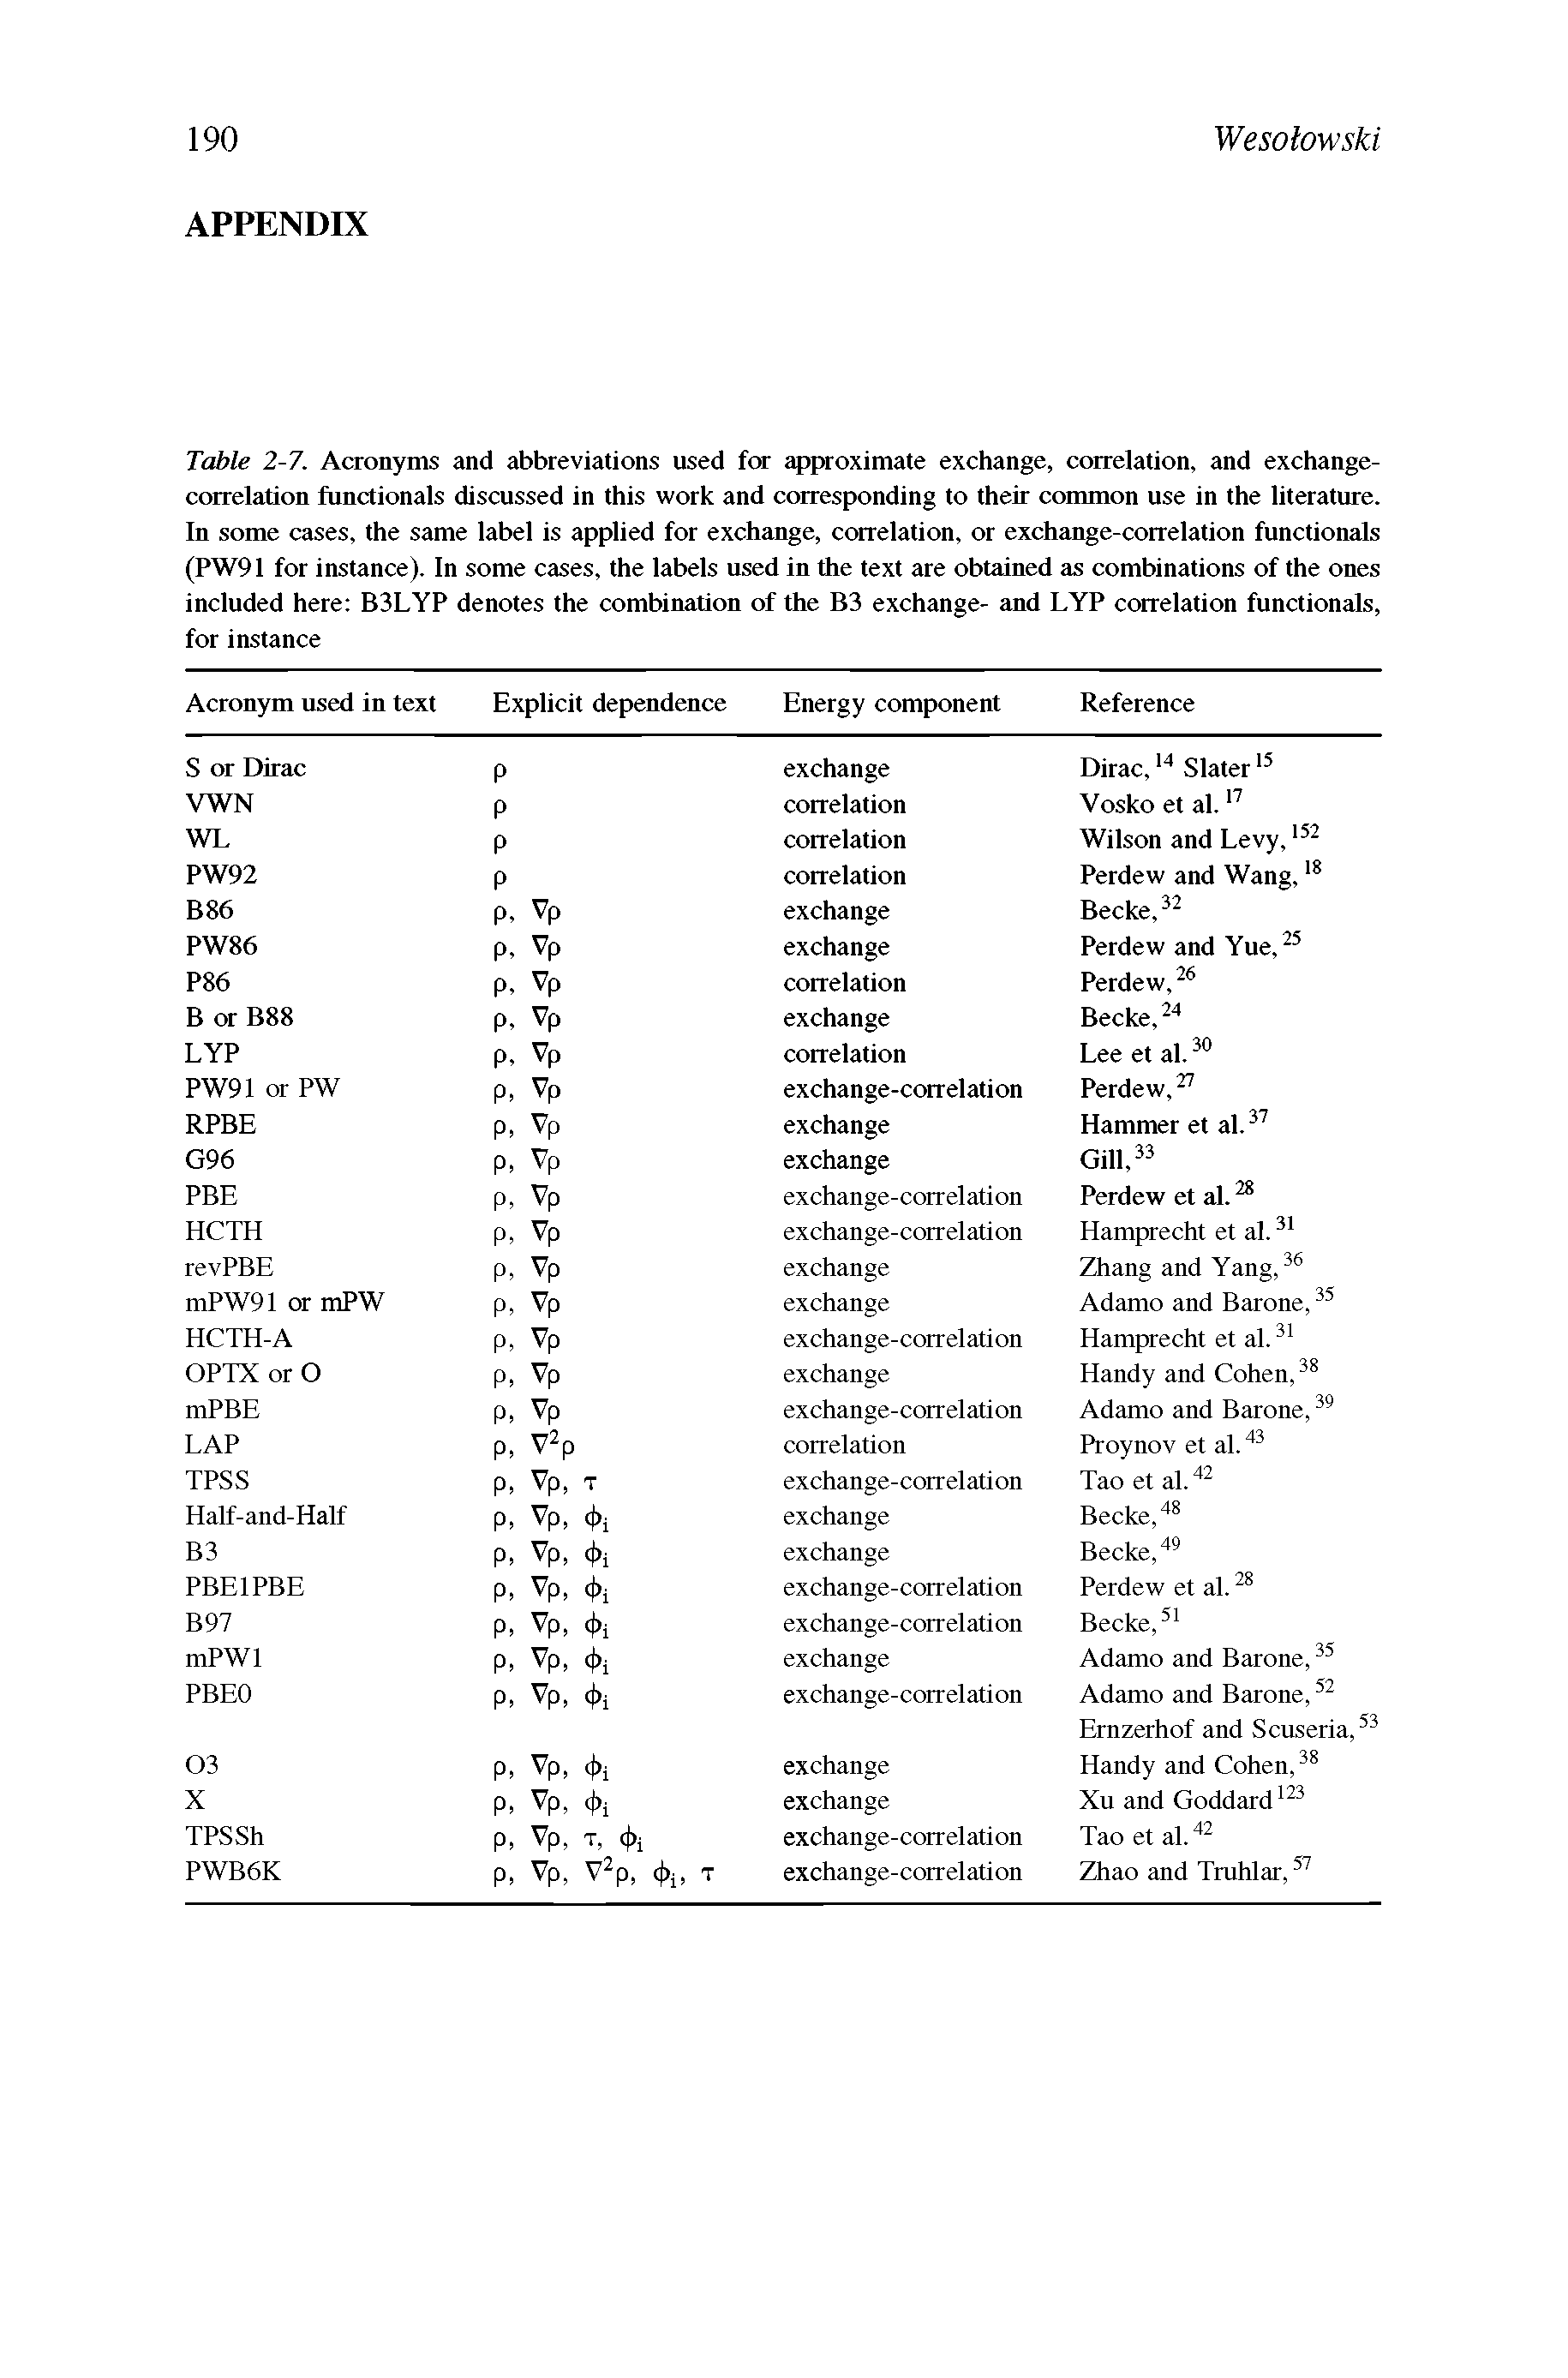 Table 2-7. Acronyms and abbreviations used for approximate exchange, correlation, and exchange-correlation functionals discussed in this work and corresponding to their common use in the literature. In some cases, the same label is applied for exchange, correlation, or exchange-correlation functionals (PW91 for instance). In some cases, the labels used in the text are obtained as combinations of the ones included here B3LYP denotes the combination of the B3 exchange- and LYP correlation functionals, for instance...